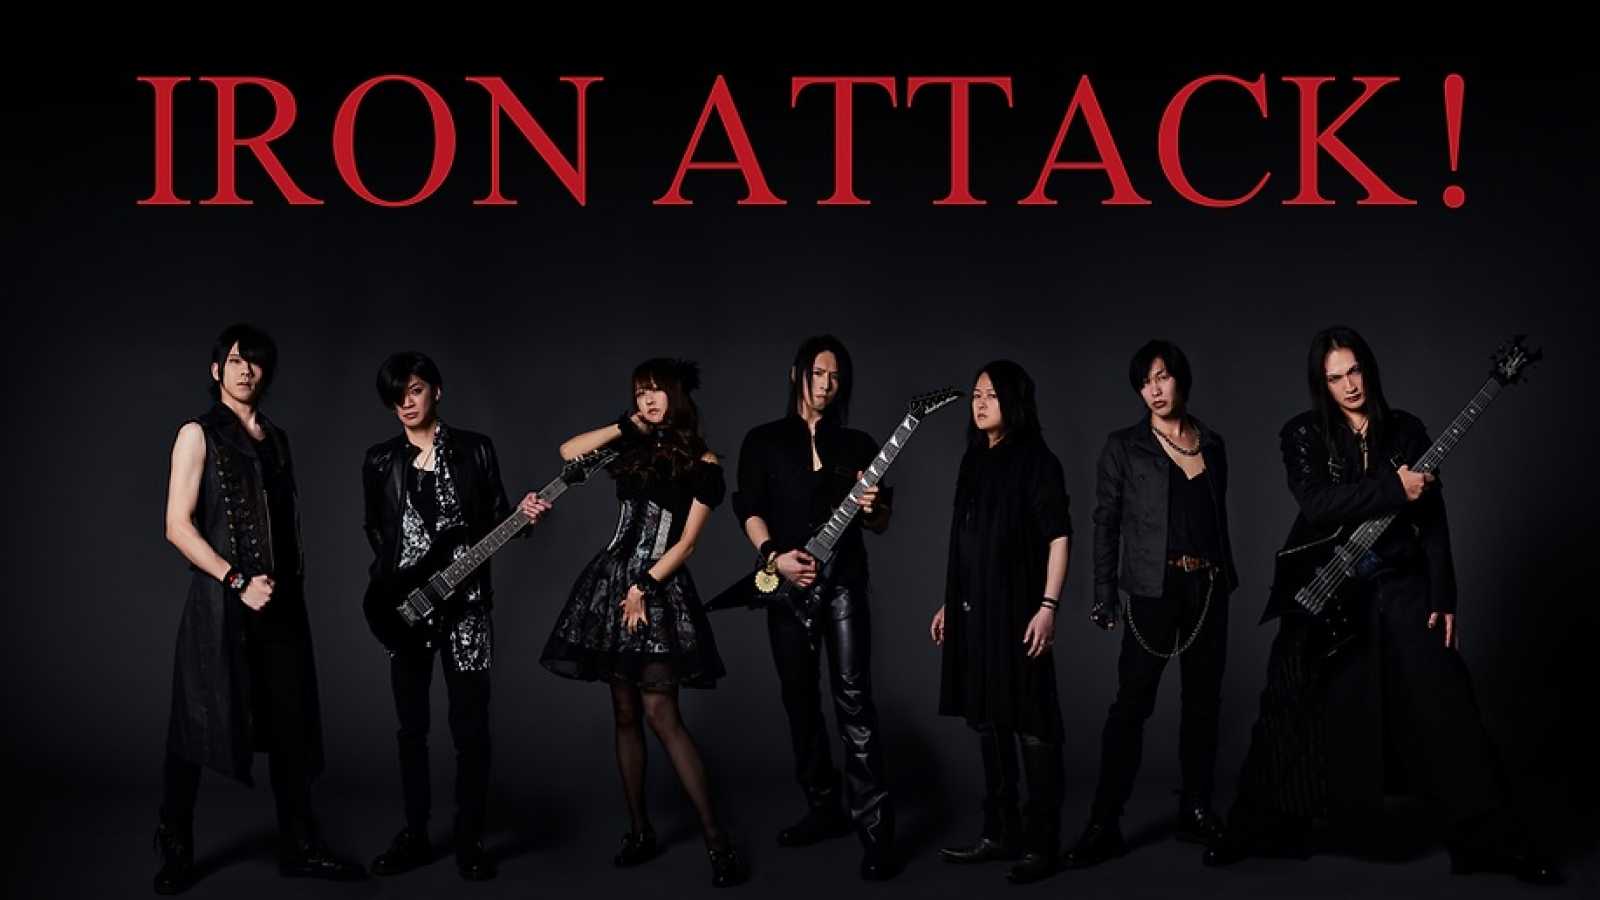 Nowy album IRON ATTACK! © IRON ATTACK!. All rights reserved.